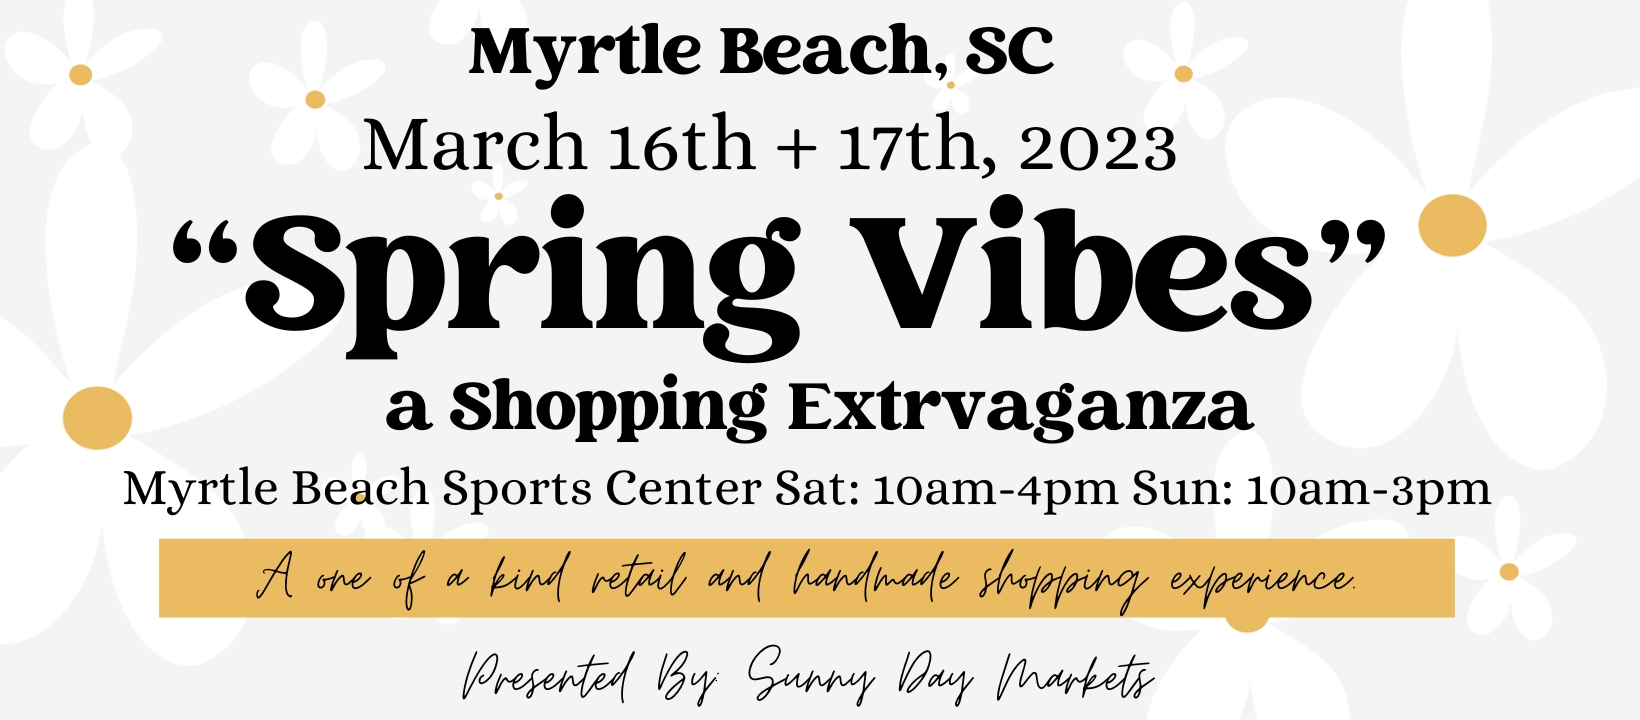 "Spring Vibes” a Shopping Extravaganza cover image